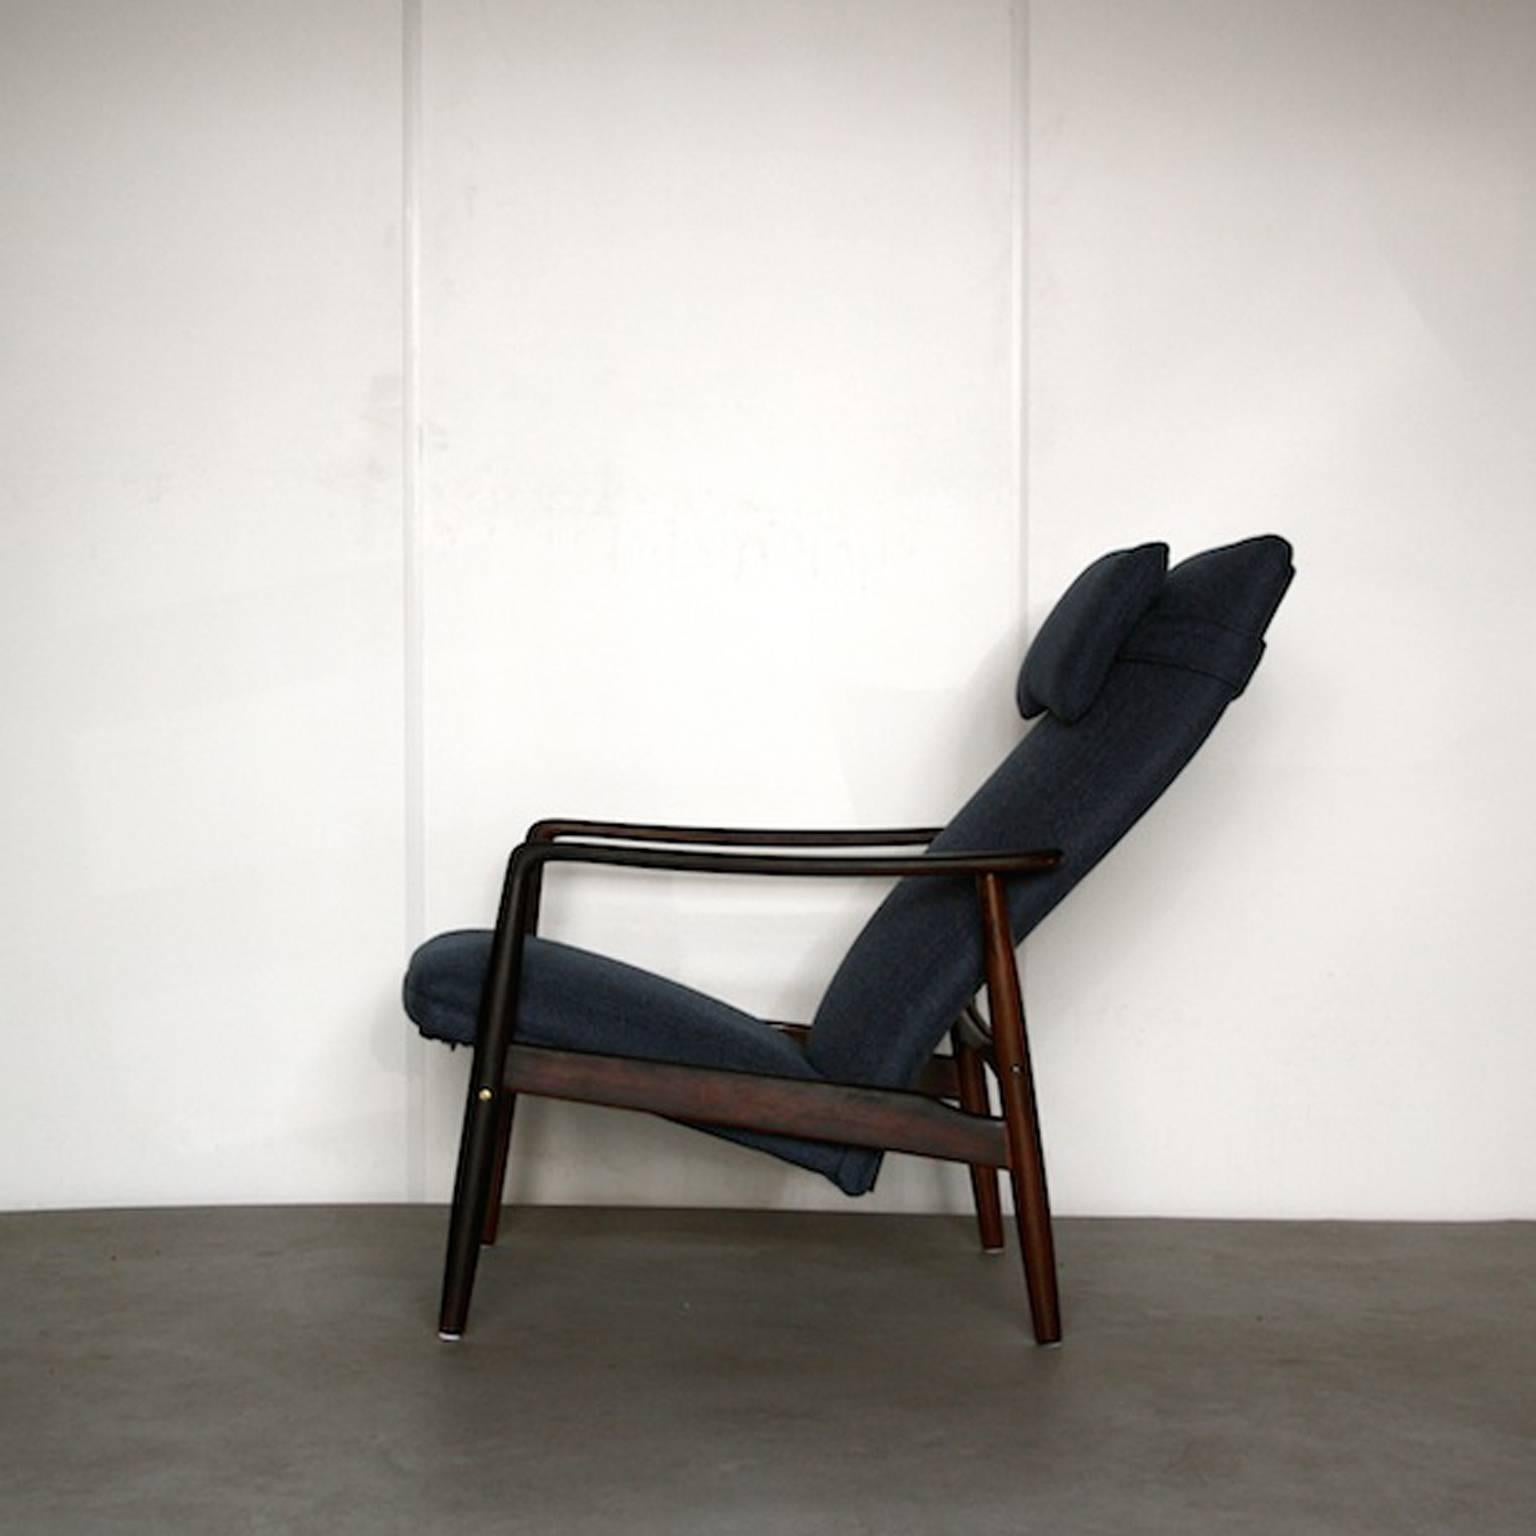 Mid-20th Century High Back Lounge Chair by Søren Ladefoged for SL Mobler, Danish Design, 1950s